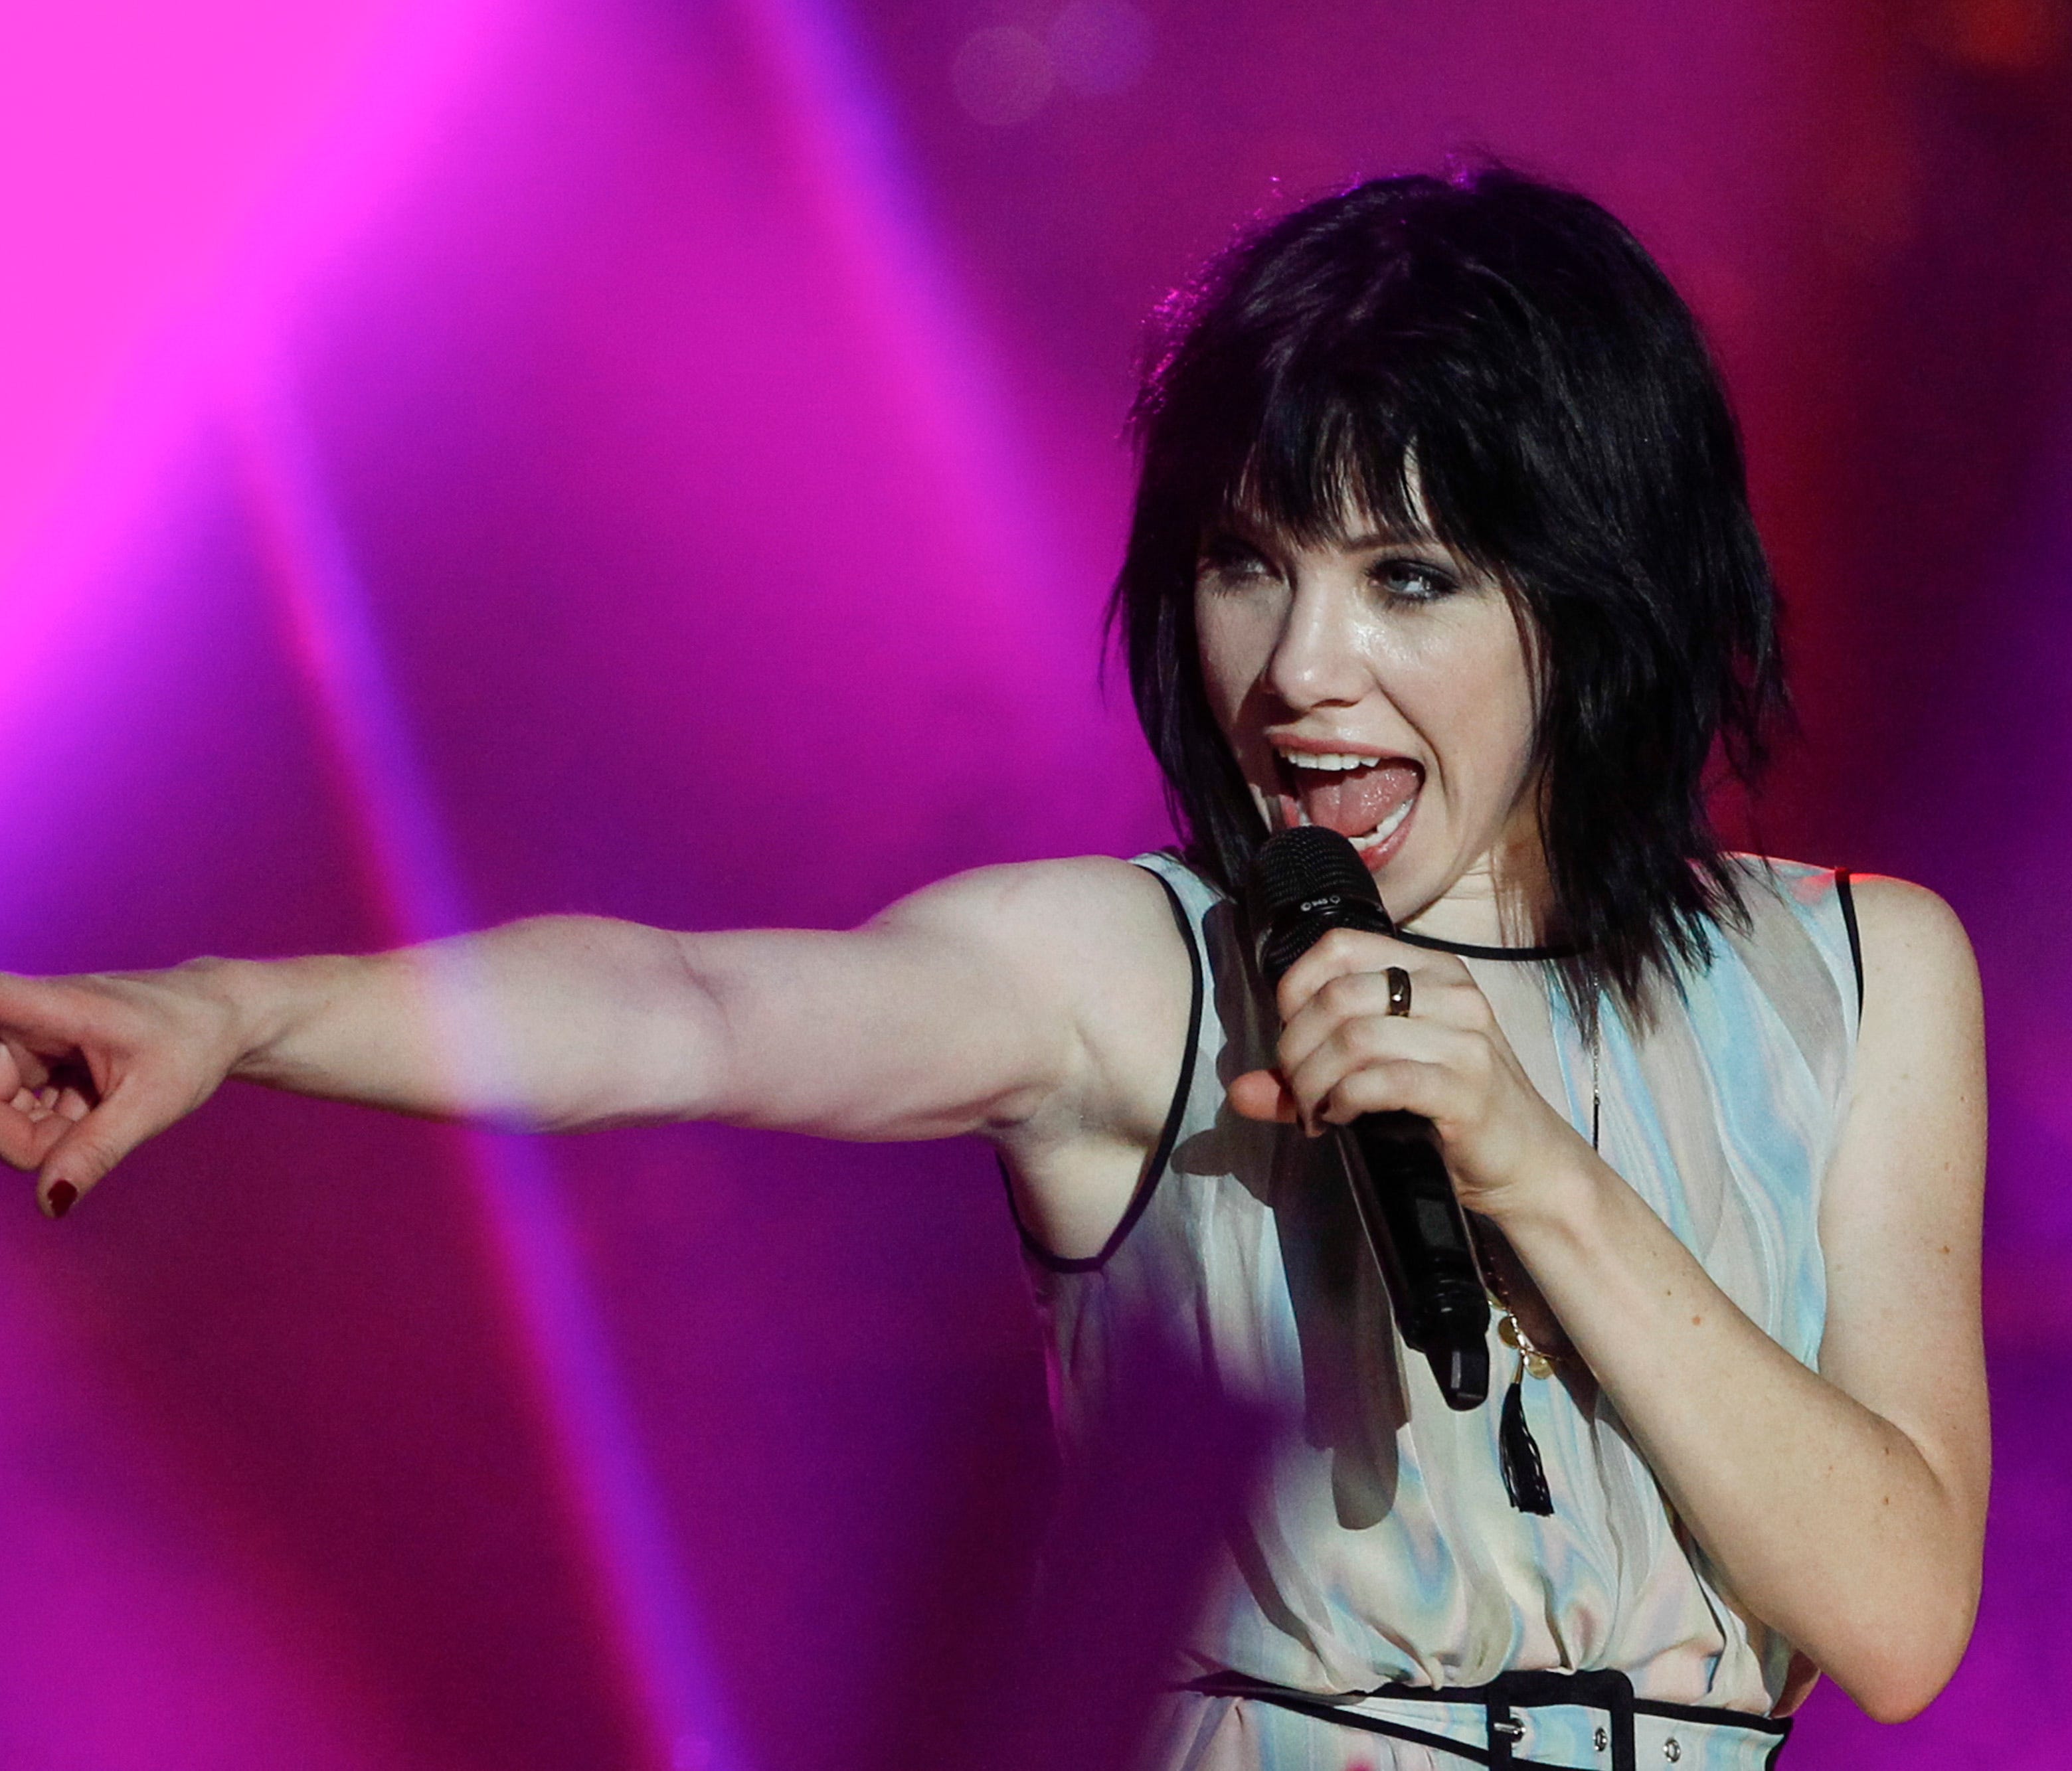 Carly Rae Jepsen performs at the MTV World Stage Live in Malaysia on Sept. 12.